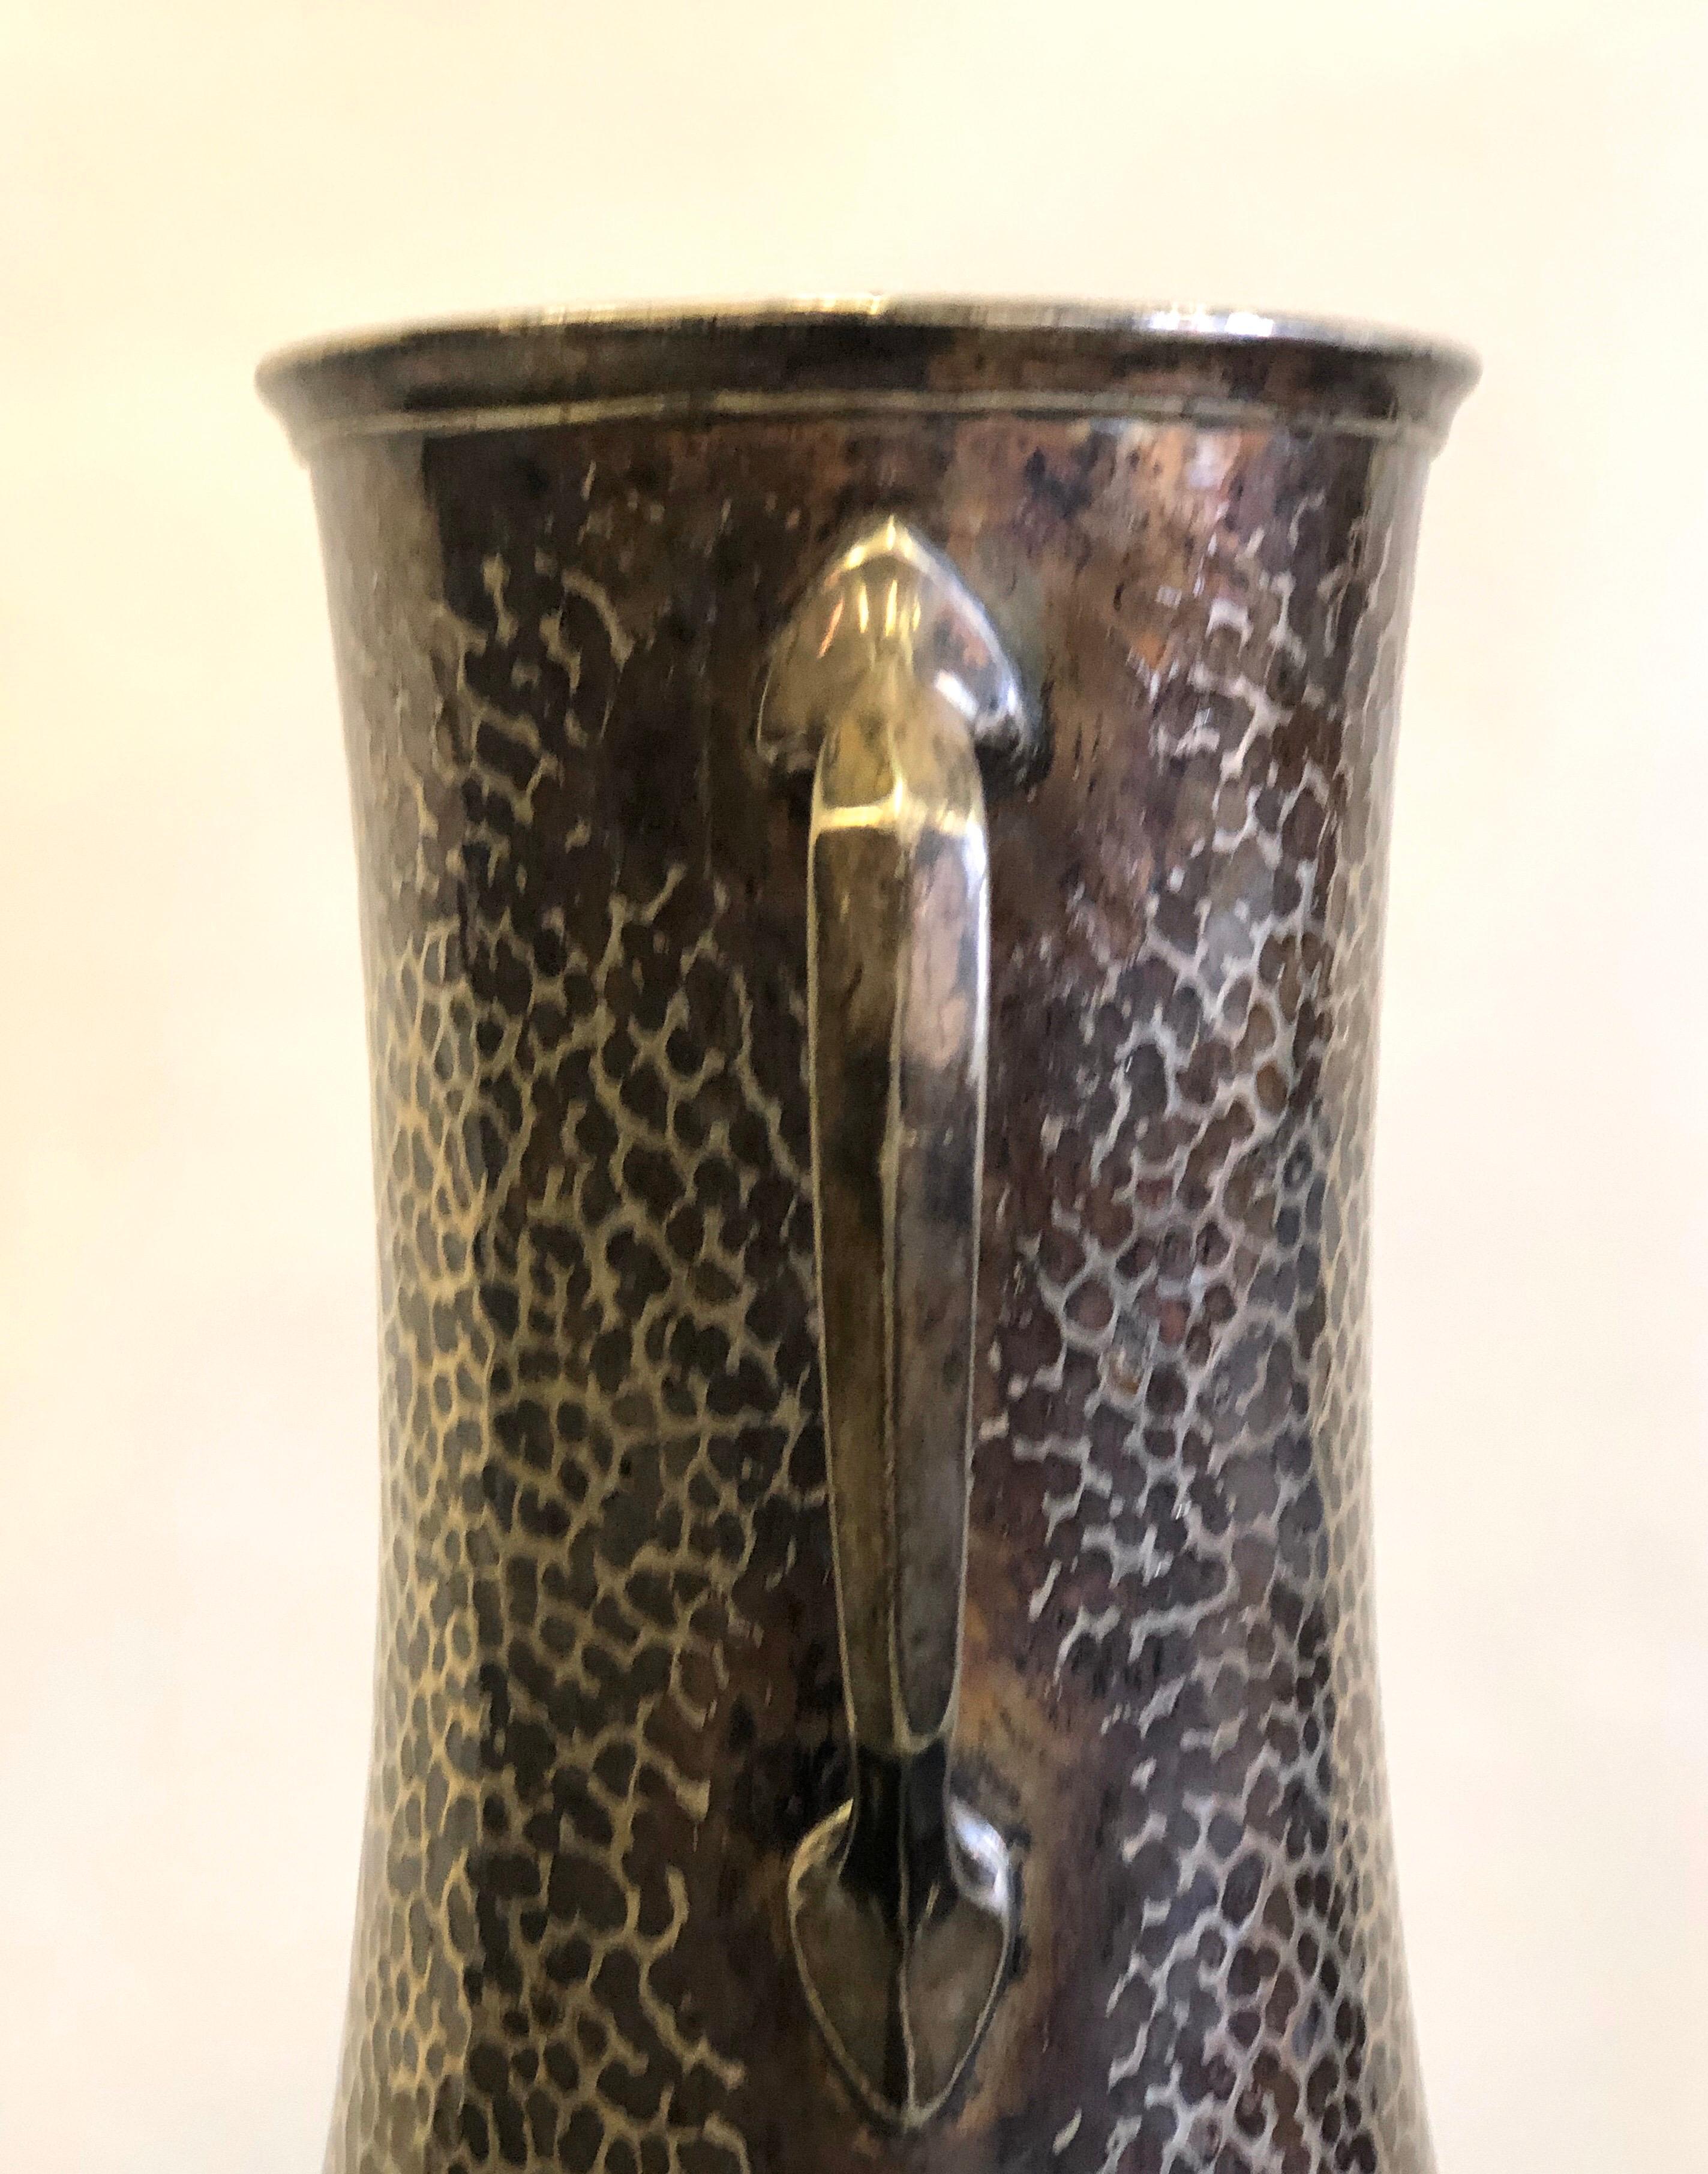 Proto Bauhaus Hammered Silver & Copper Vase or Wine Cooler by Hutscheneruther In Good Condition For Sale In New York, NY